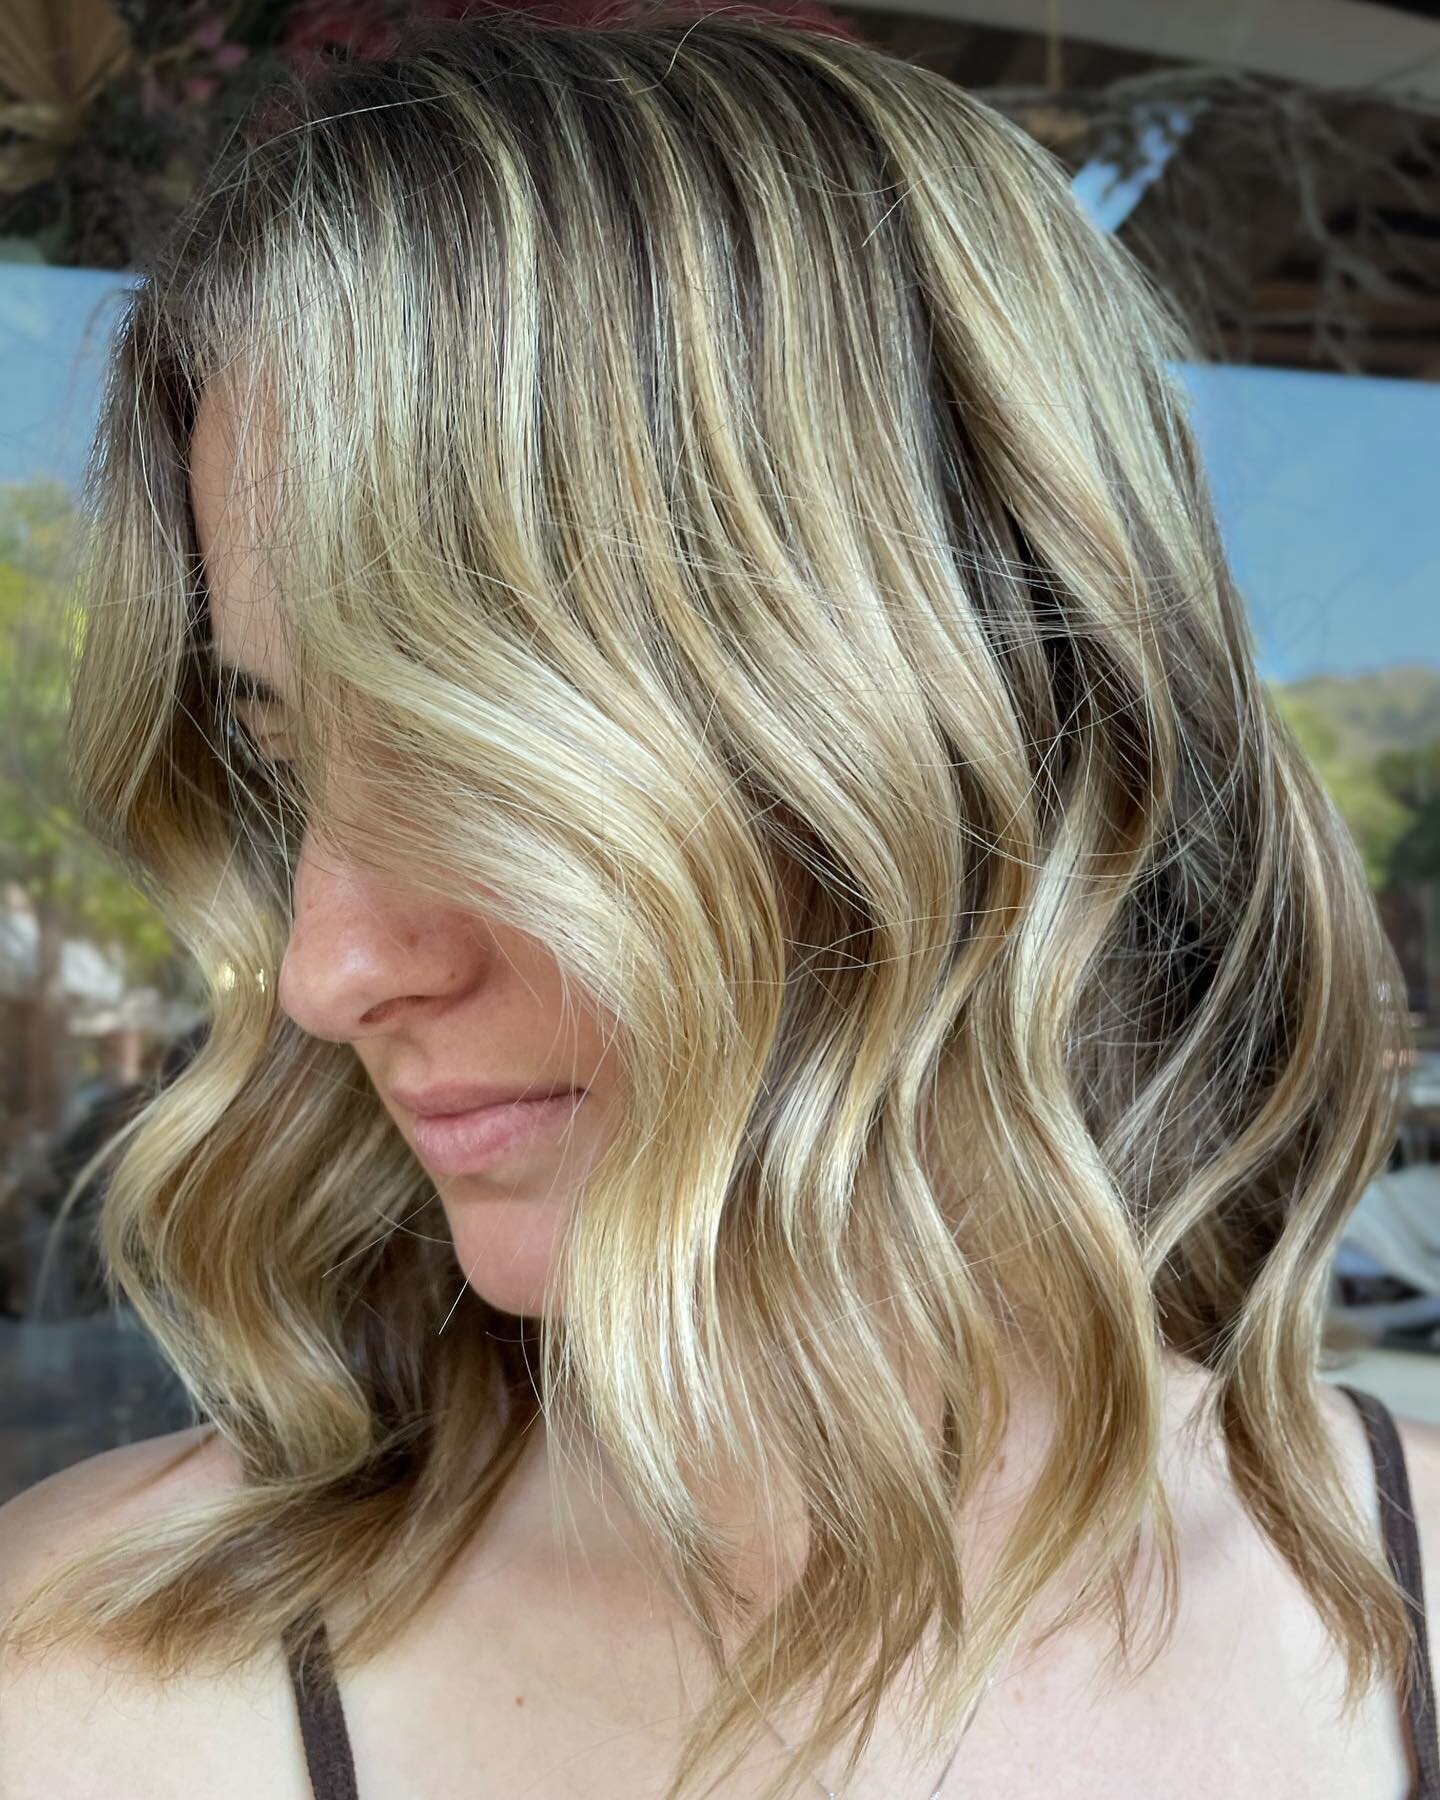 I do natural colors sometimes too 🤷🏼 Excuse the wind 🤪 
&bull;
&bull;
&bull; I'm fully booked through this month and will be on vacation 5/22-5/30. I'm going to be taking that time to be off my phone and away from work :) All messages after 5/21 w